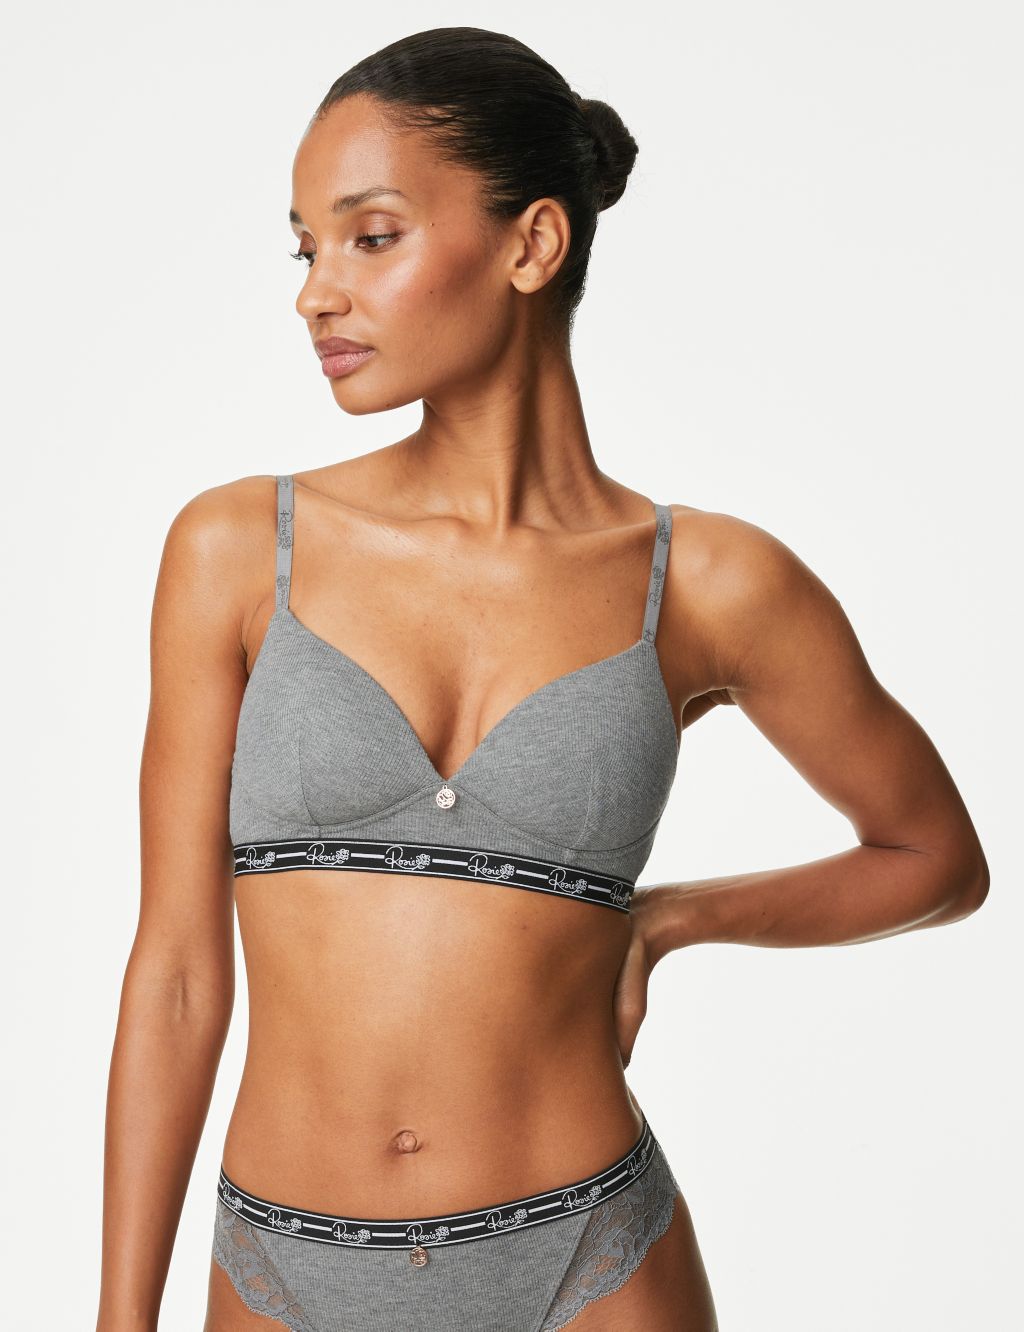 Ribbed Lounge Non Wired Plunge Bra Set A-E image 3